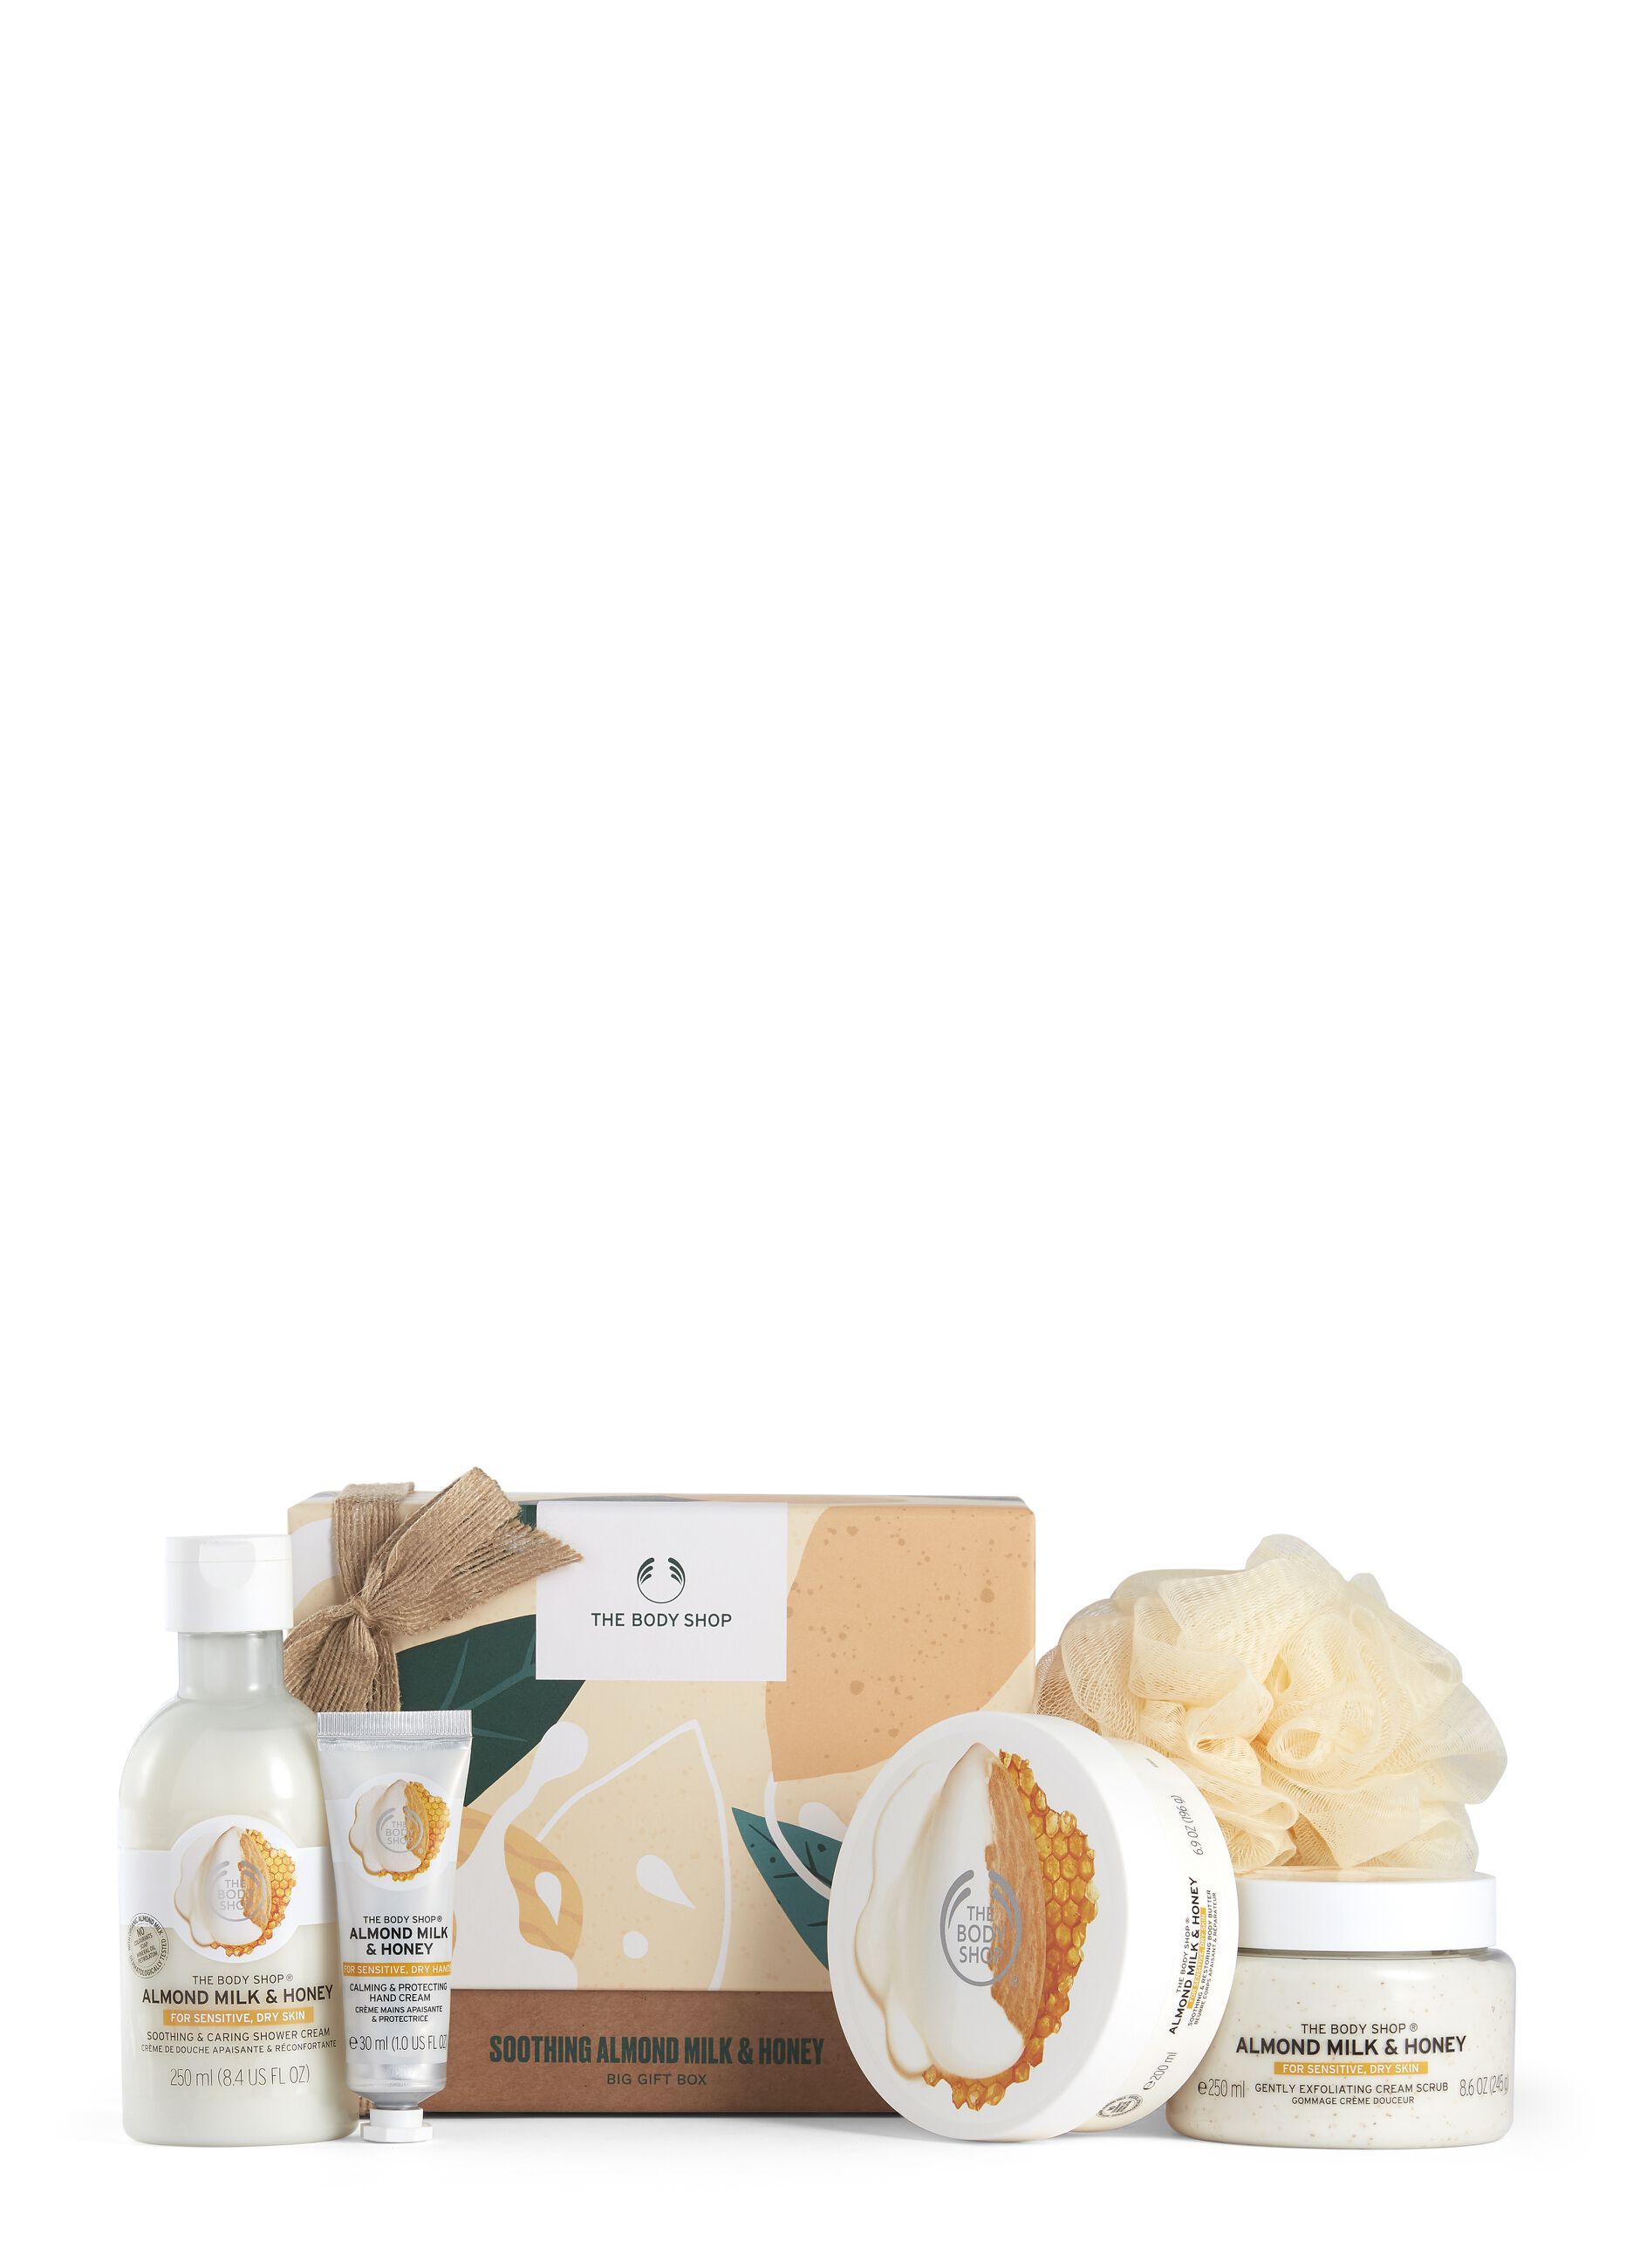 The Body Shop large almond milk and honey gift box